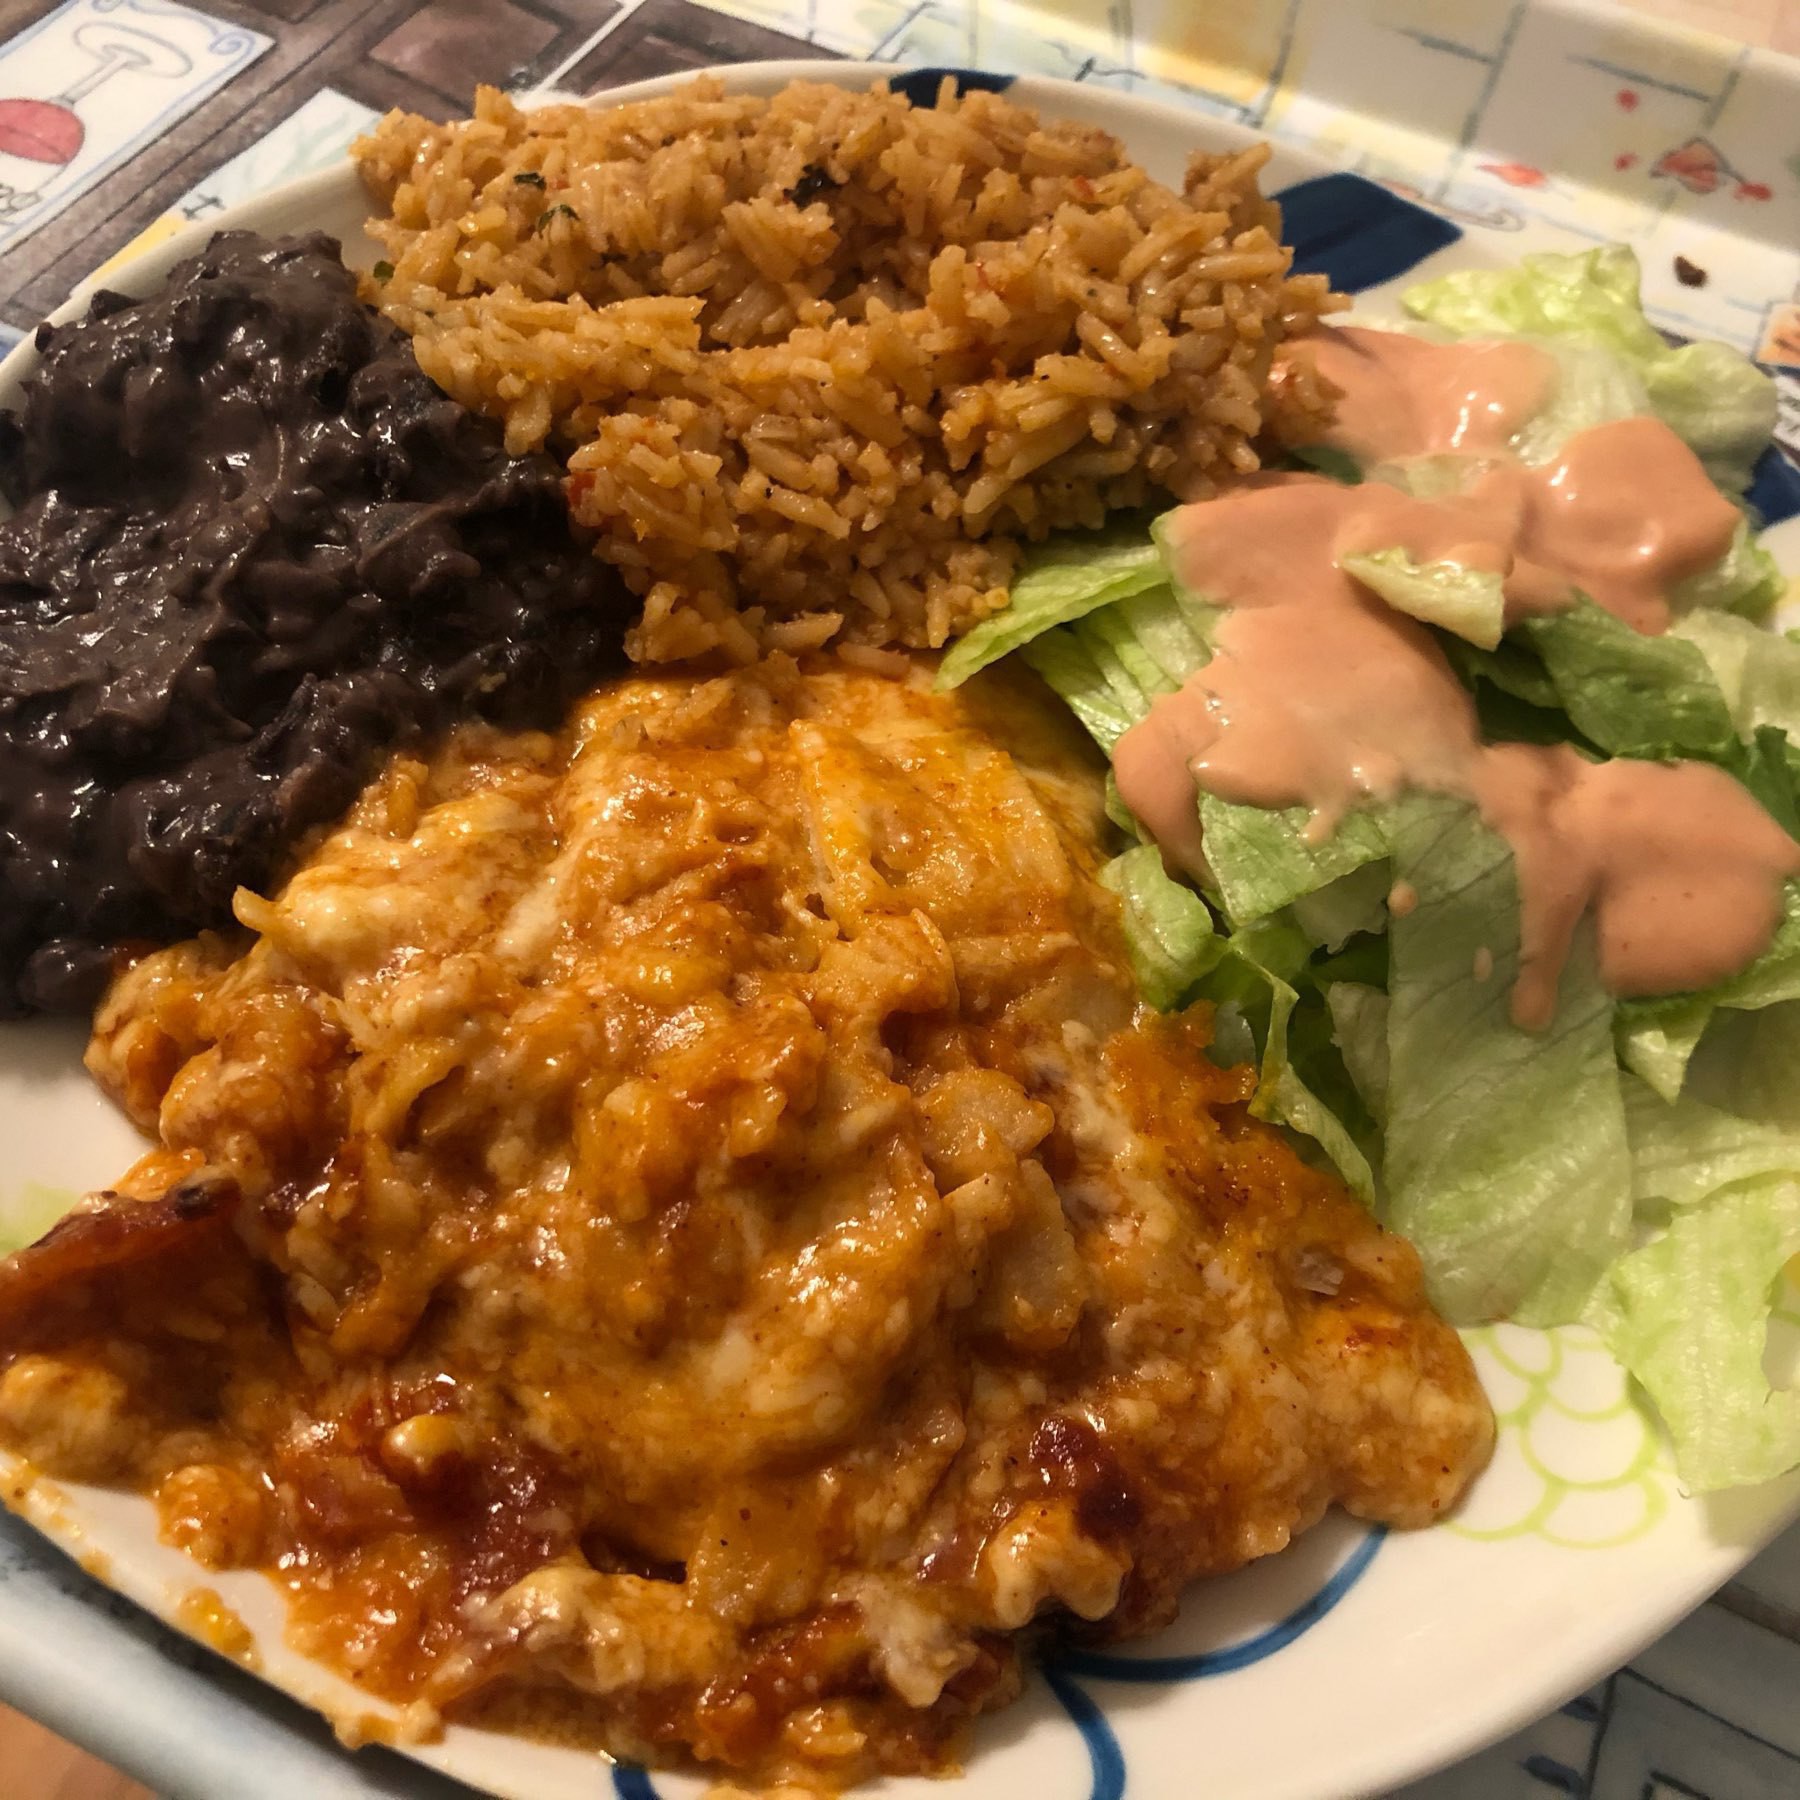 Picture of a plate with enchiladas, black beans, rice and a salad with thousand island dressing.